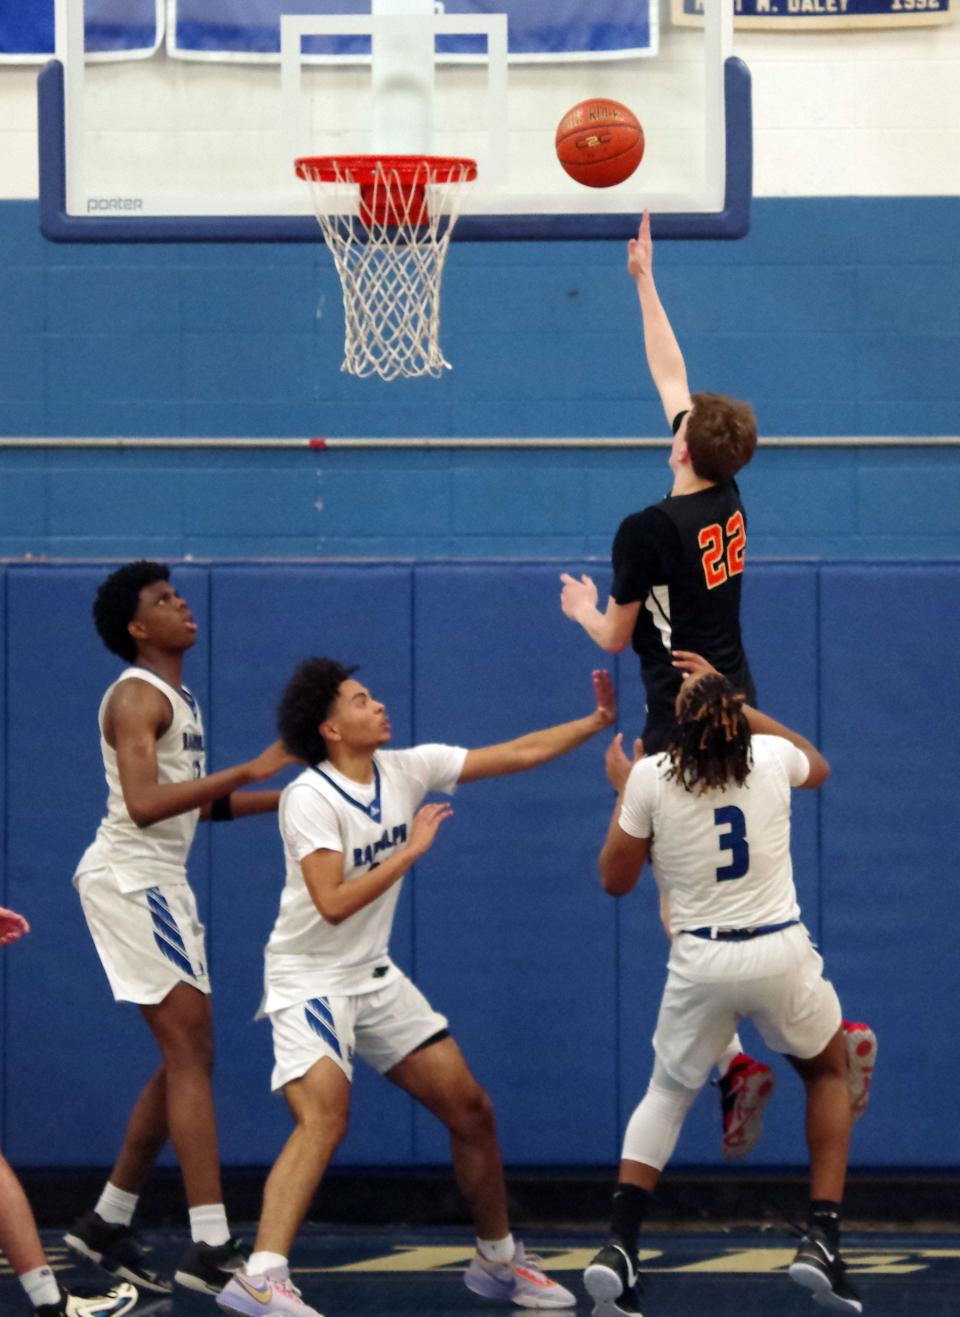 With just seconds left in the game, Matt Youngquist of Middleboro goes up and scores the shot that will seal the deal against Randolph as the Sachems beat the Blue Devils in a 45-42 thriller on Friday, Dec. 15, 2023.